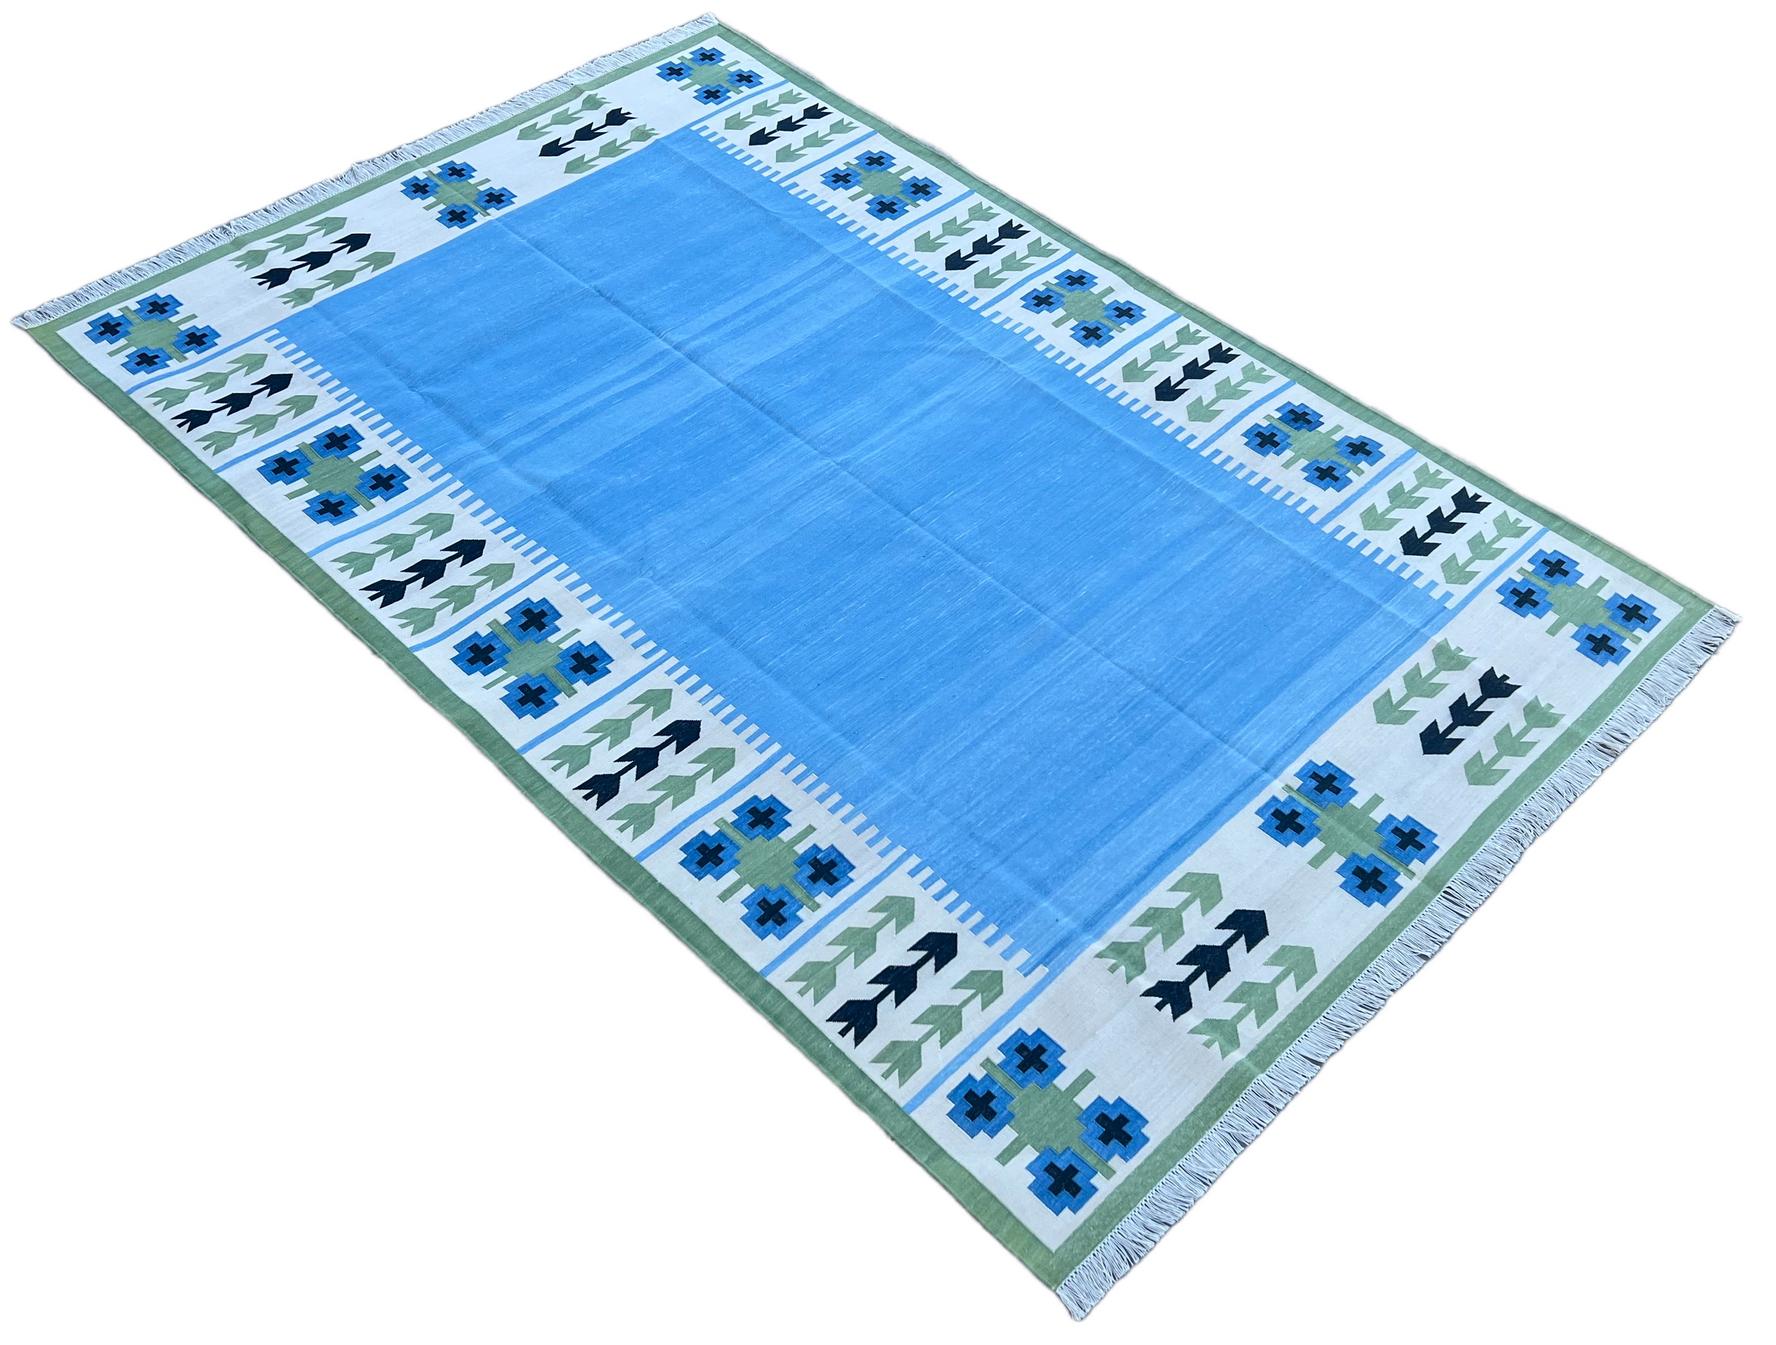 Cotton Natural Vegetable Dyed Blue And Green Leaf Patterned Indian Rug-6'x9'
These special flat-weave dhurries are hand-woven with 15 ply 100% cotton yarn. Due to the special manufacturing techniques used to create our rugs, the size and color of